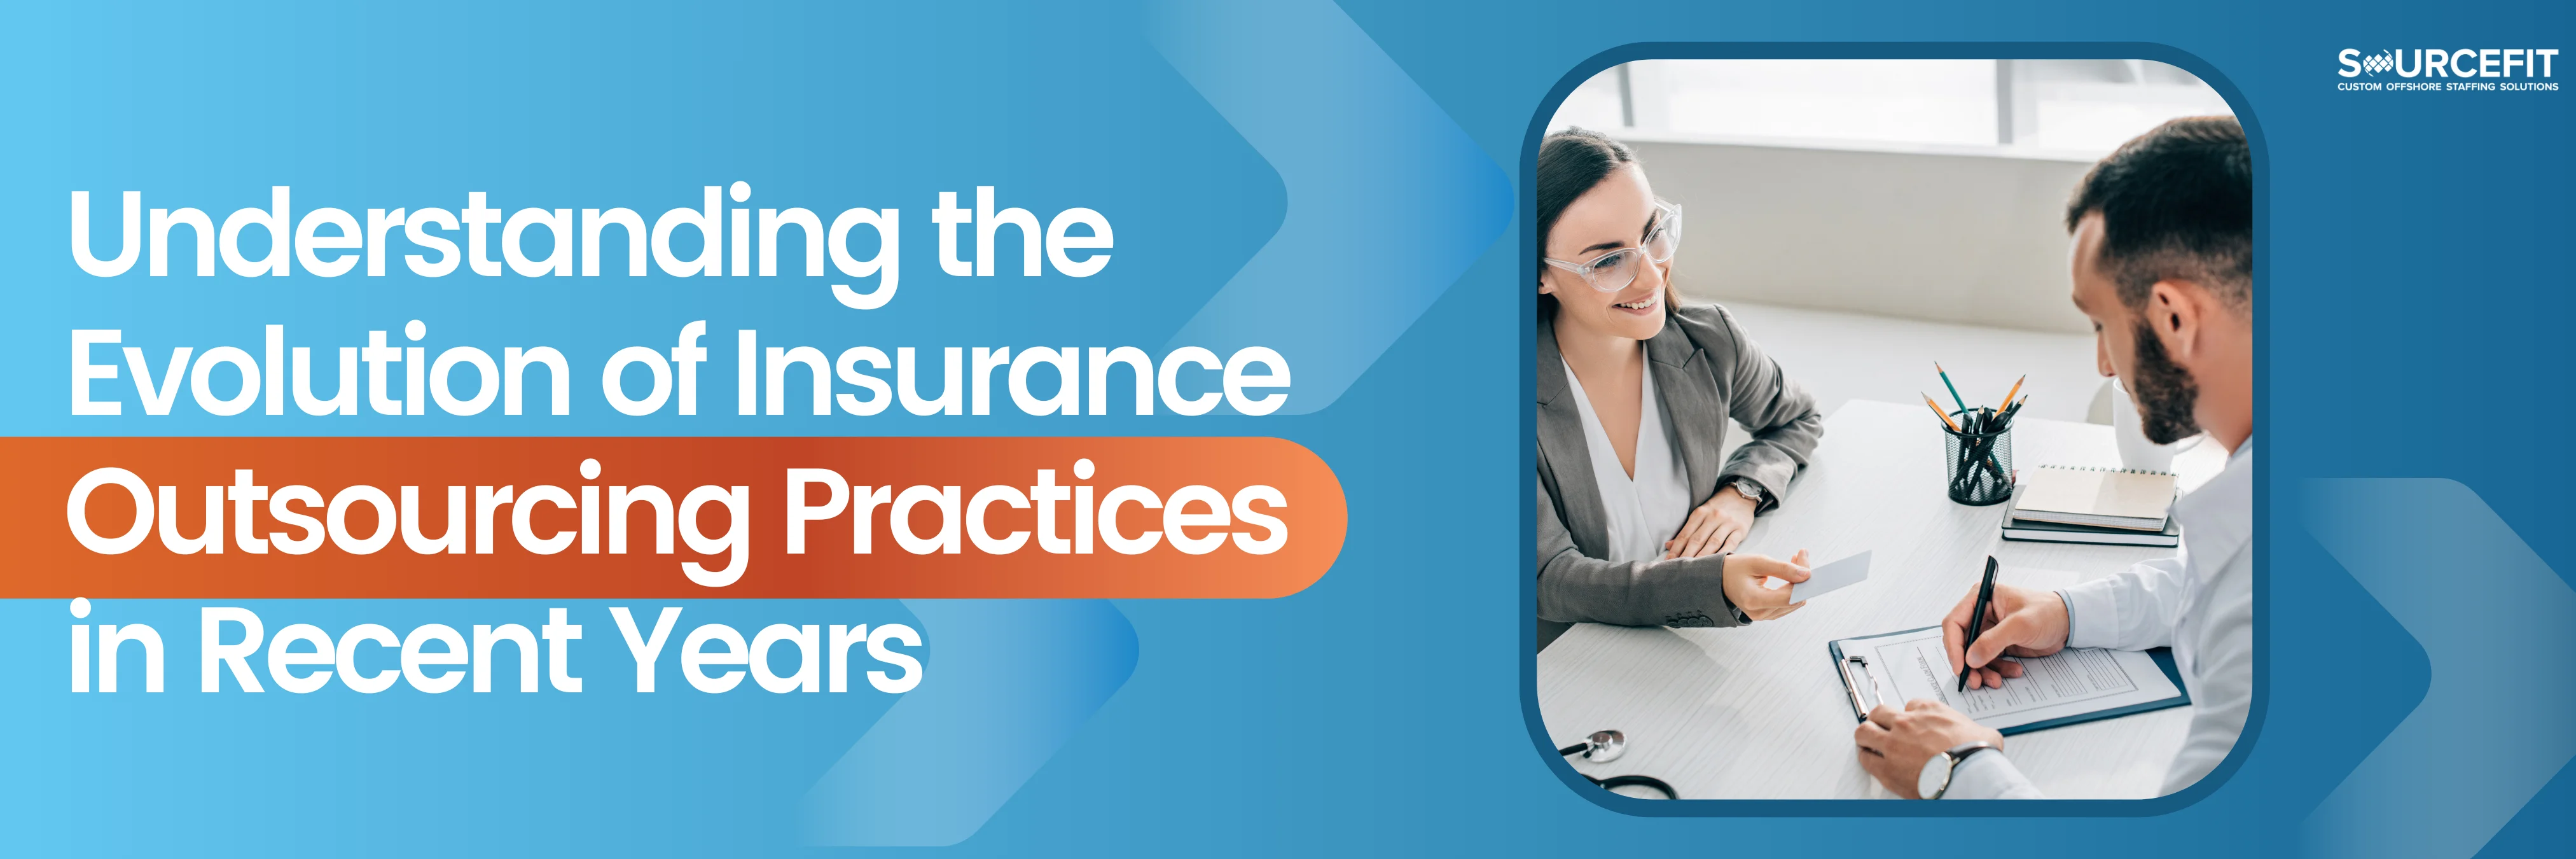 Understanding-the-Evolution-of-Insurance-Outsourcing-Practices-in-Recent-Years._1200x628